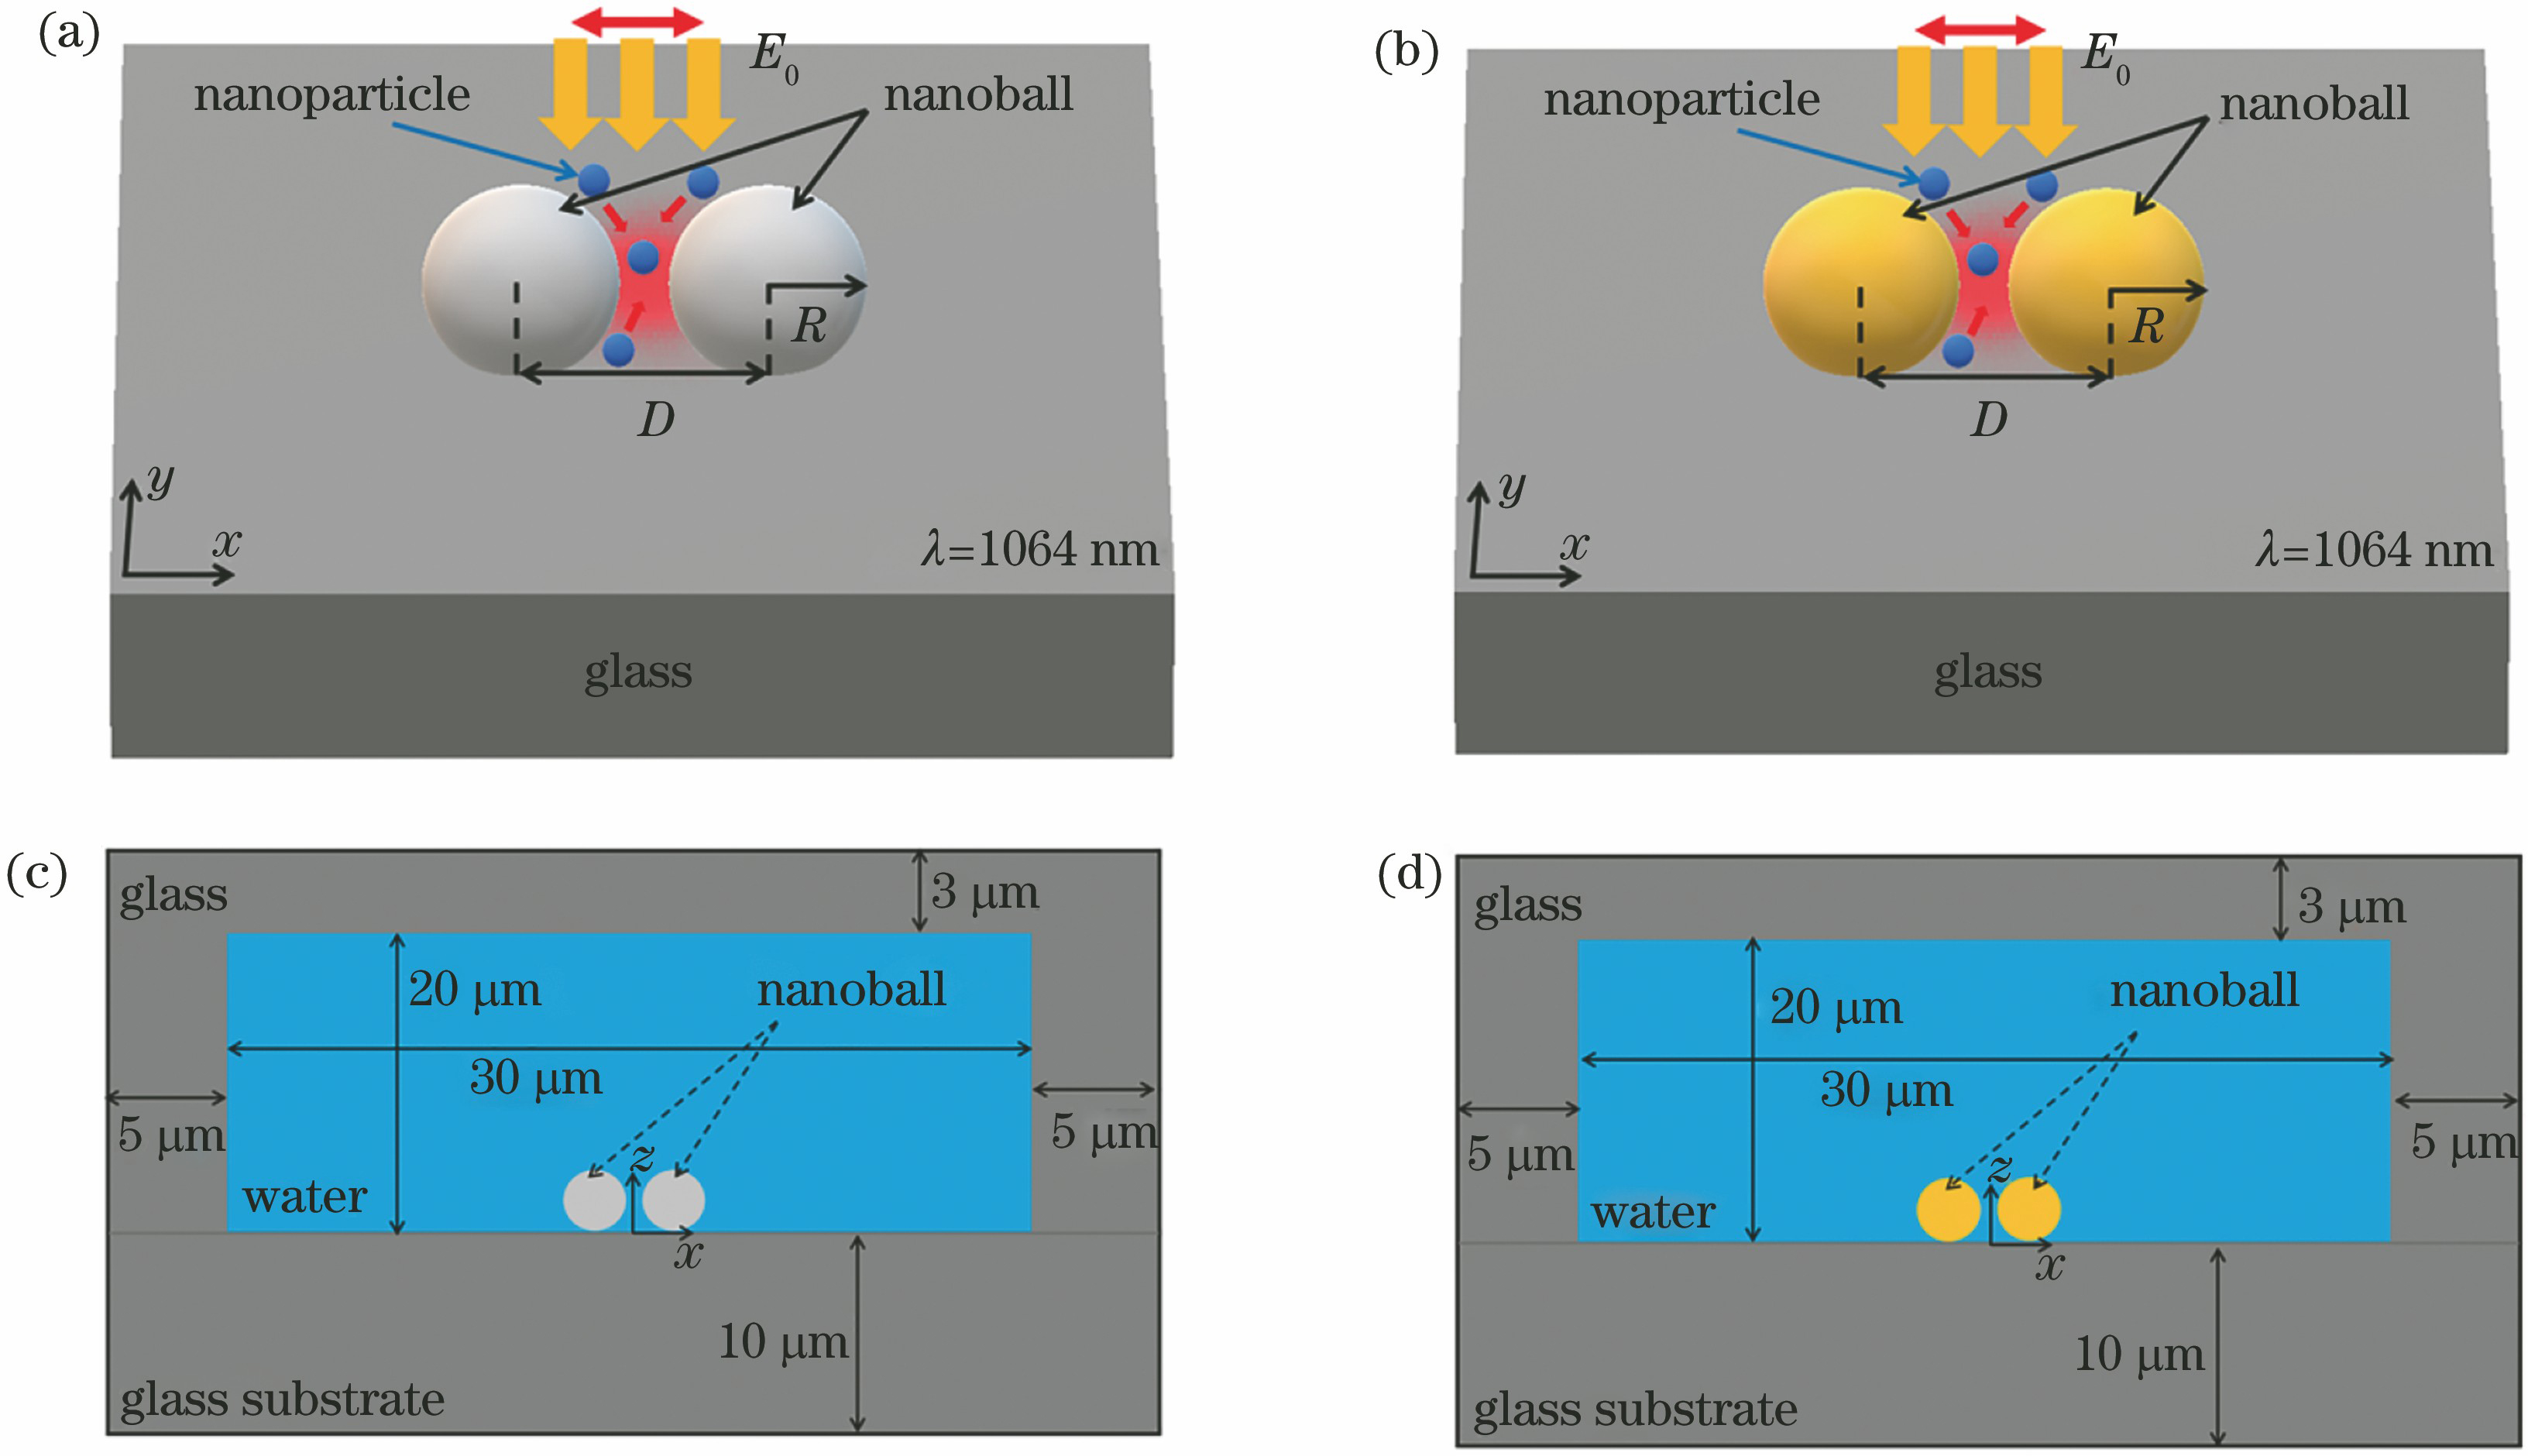 Structural diagrams and parameters of simulation models. (a) Structural diagram of silicon-based double nanoballs; (b) structural diagram of gold-based double nanoballs; (c) parameters of silicon-based double nanoballs; (d) parameters of gold-based double nanoballs